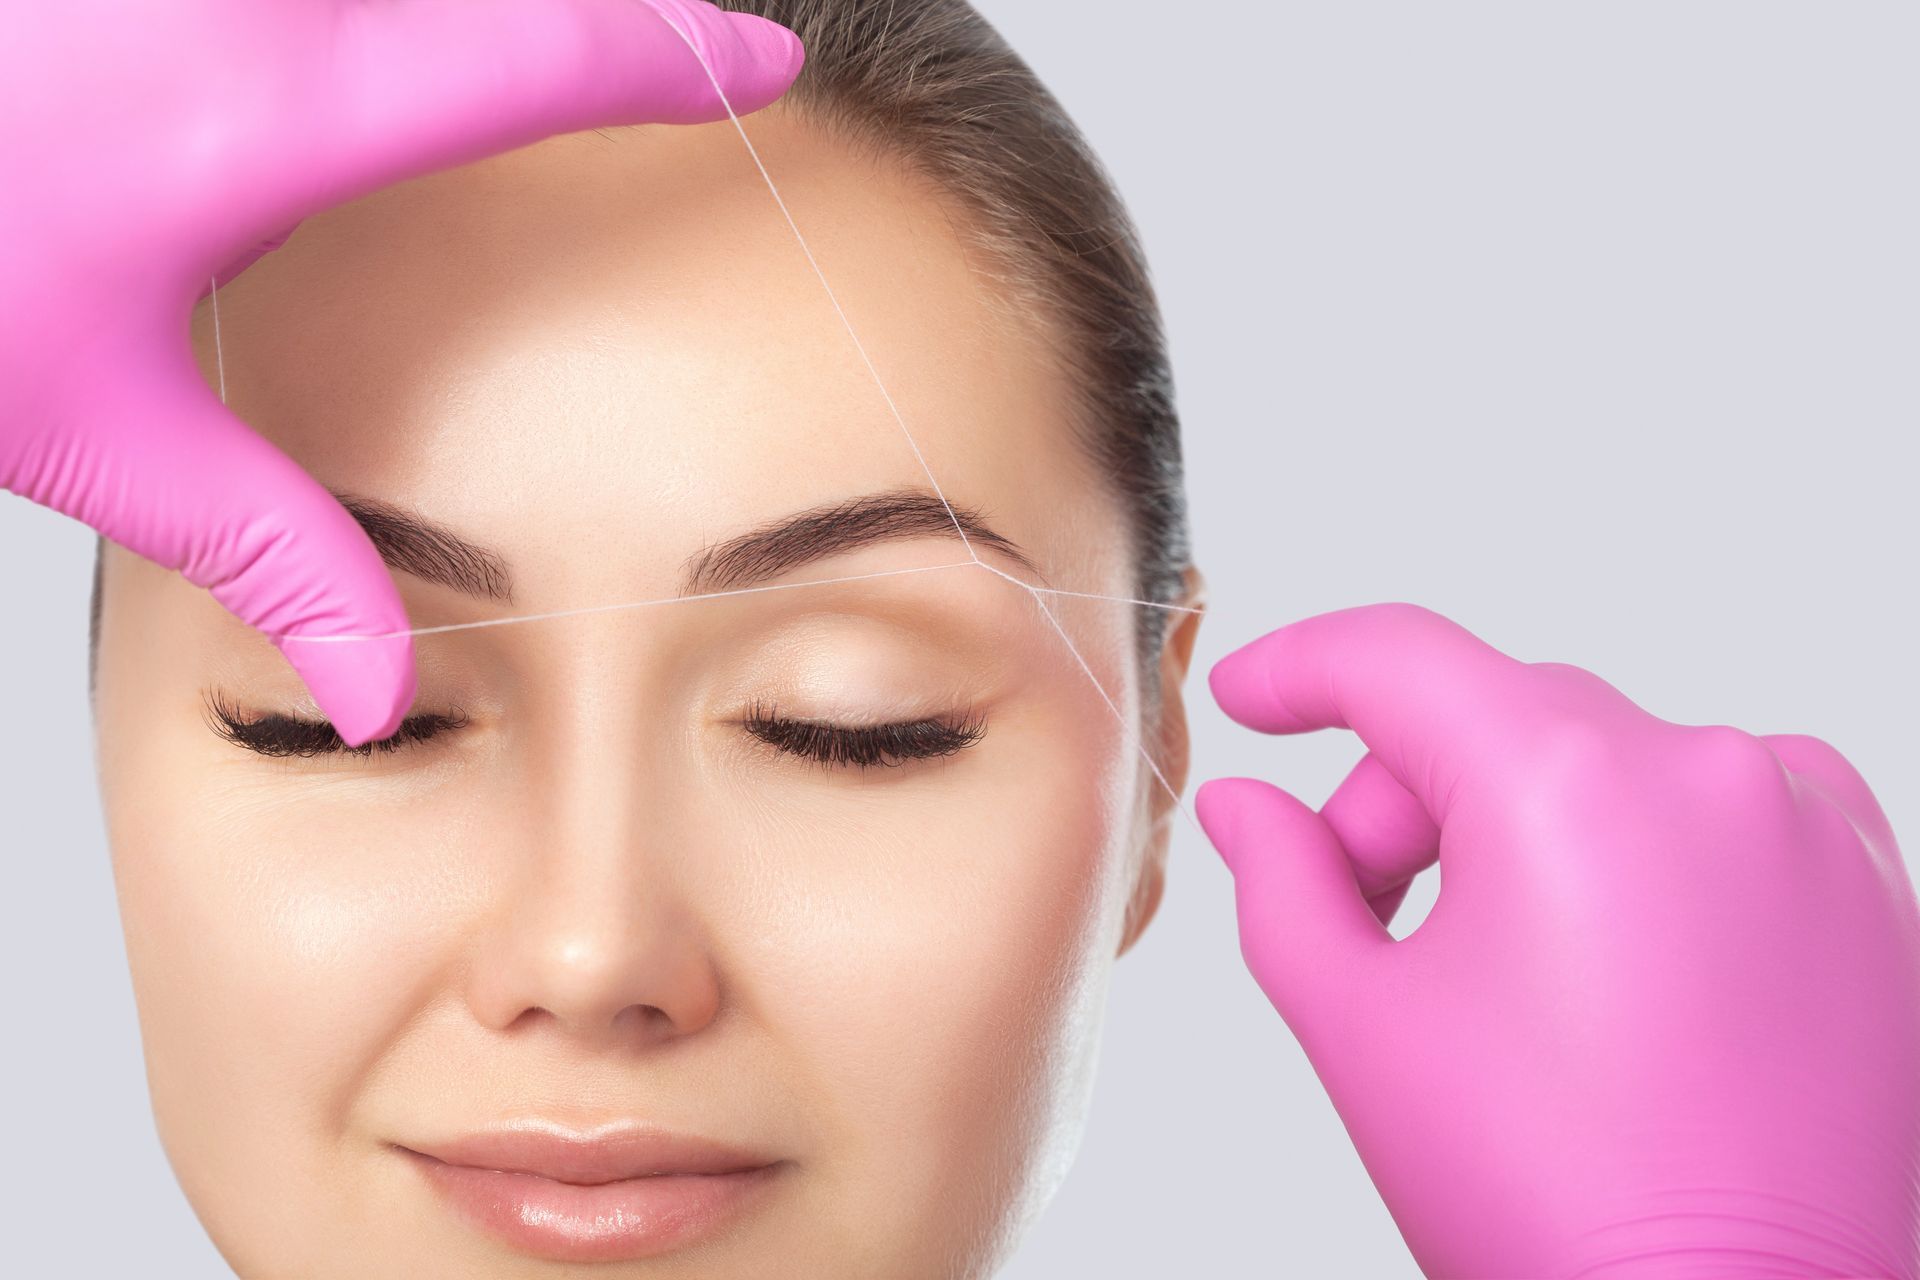 A woman is getting her eyebrows threaded with pink gloves.